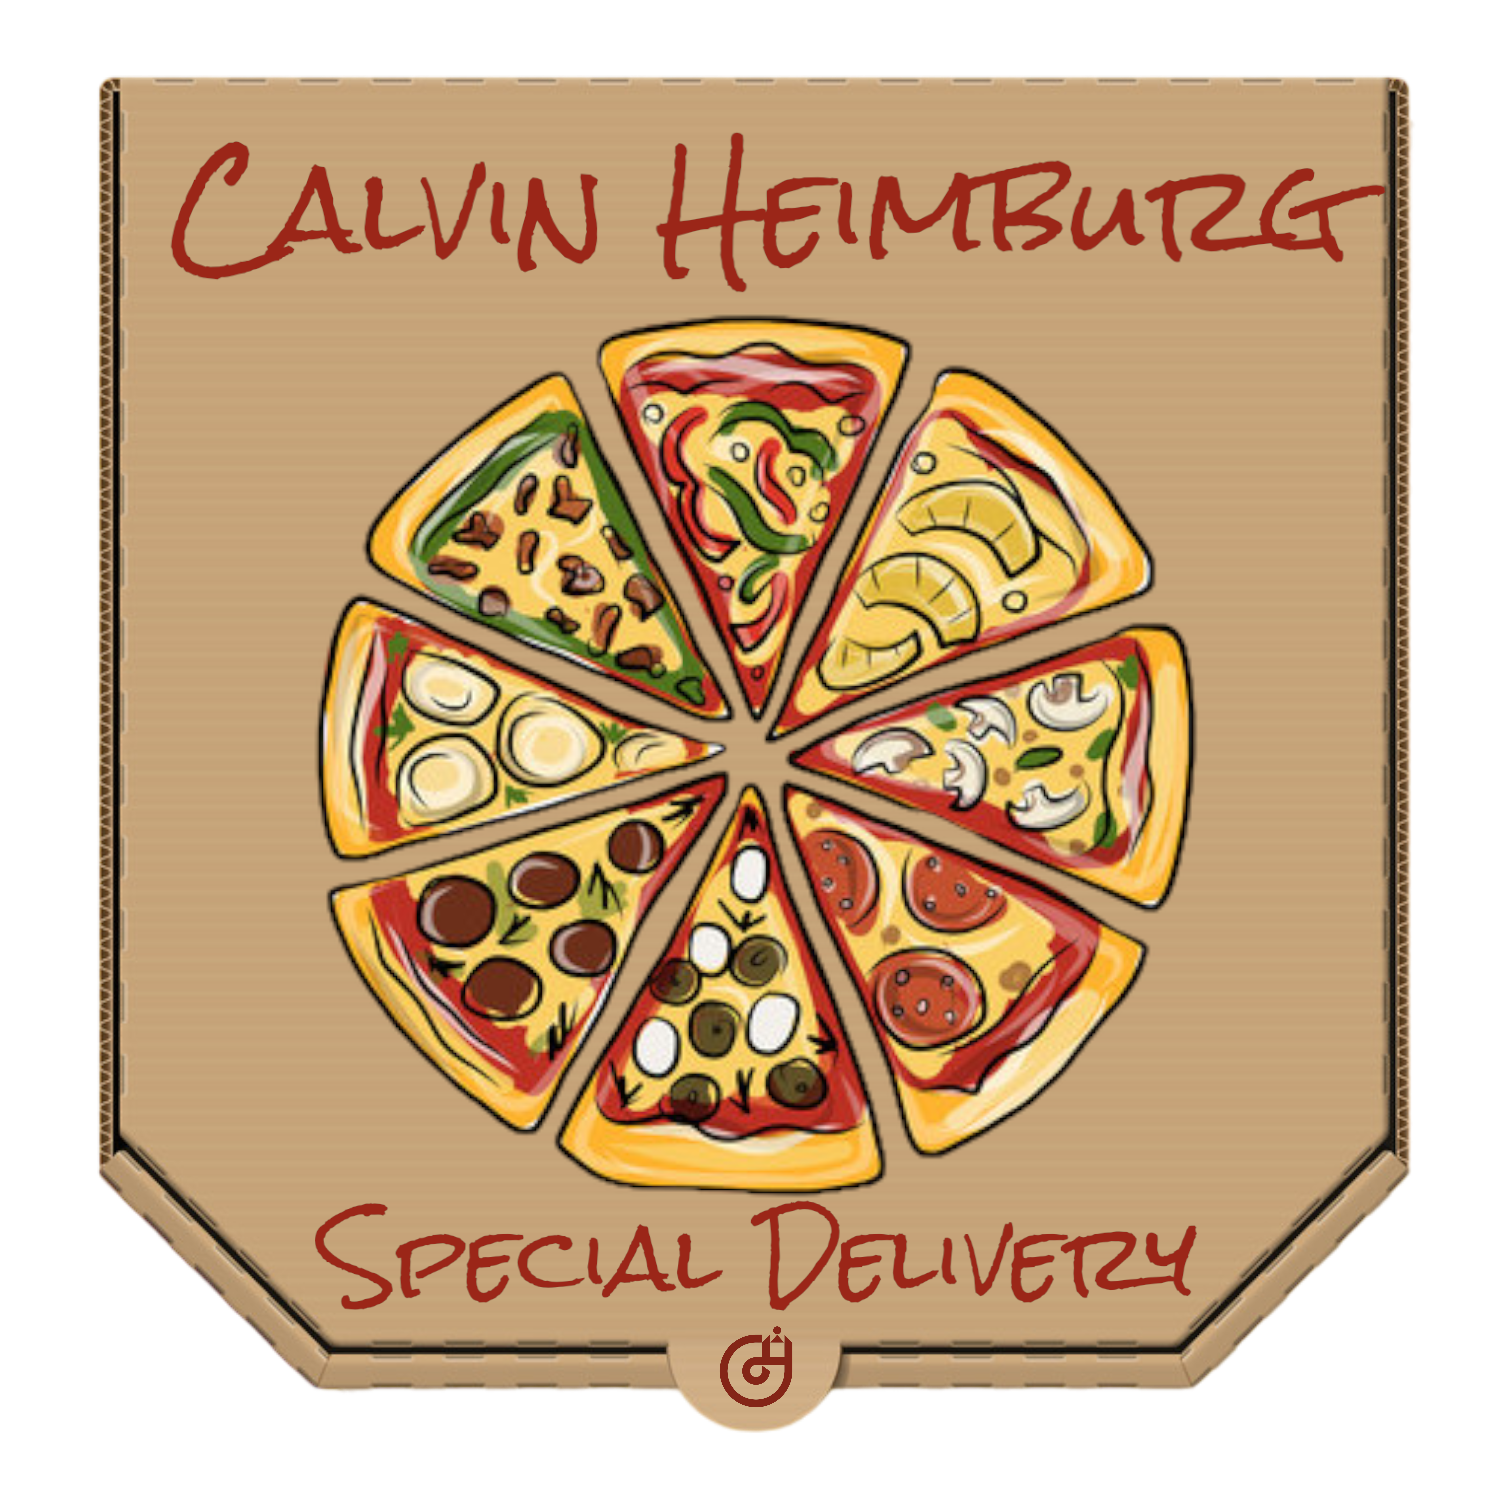 Calvin Heimburg Monthly Special Delivery Subscription Box - Flight